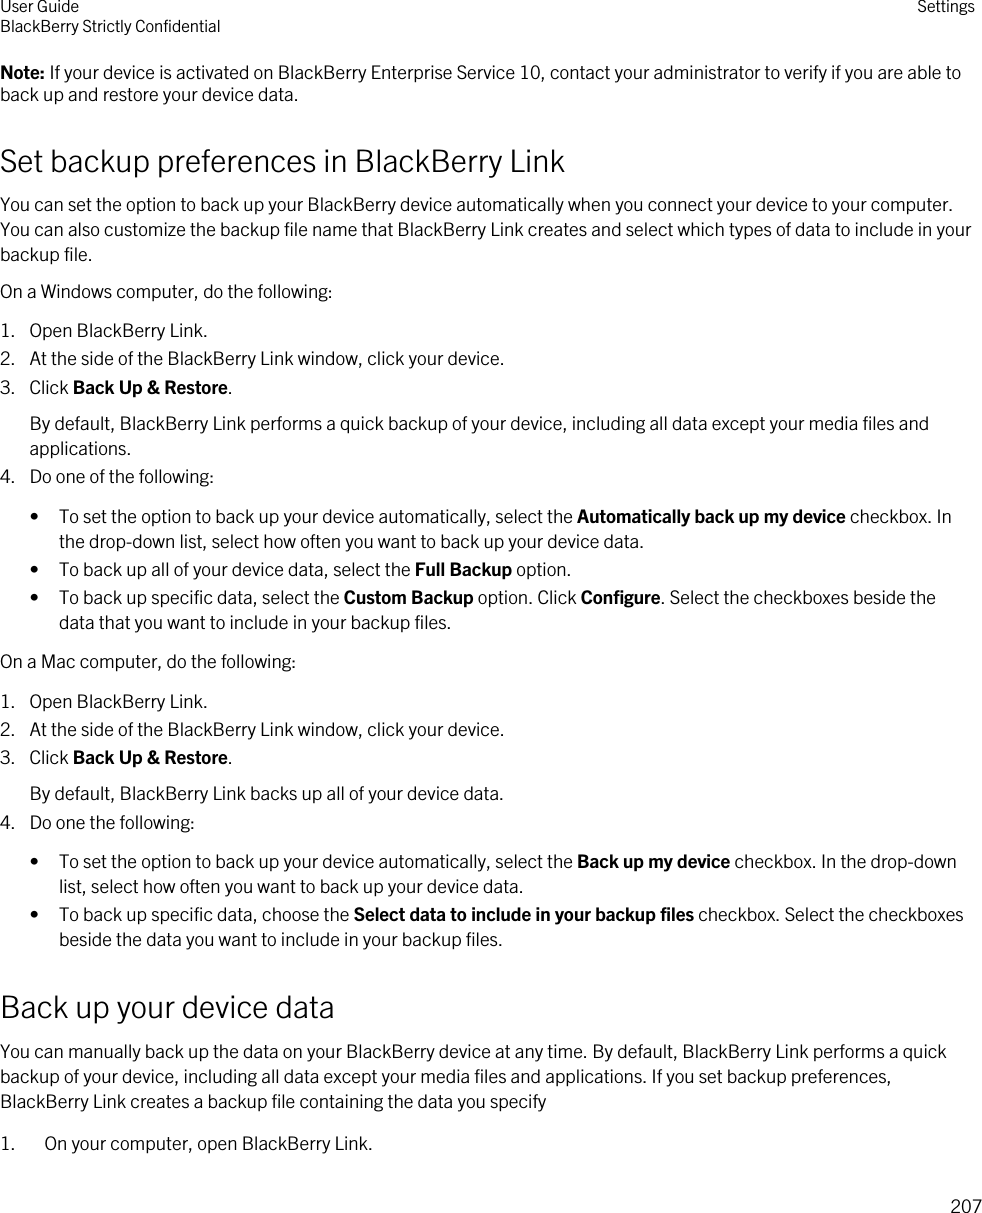 Note: If your device is activated on BlackBerry Enterprise Service 10, contact your administrator to verify if you are able to back up and restore your device data.Set backup preferences in BlackBerry LinkYou can set the option to back up your BlackBerry device automatically when you connect your device to your computer. You can also customize the backup file name that BlackBerry Link creates and select which types of data to include in your backup file.On a Windows computer, do the following:1. Open BlackBerry Link.2. At the side of the BlackBerry Link window, click your device.3. Click Back Up &amp; Restore.By default, BlackBerry Link performs a quick backup of your device, including all data except your media files and applications.4. Do one of the following:• To set the option to back up your device automatically, select the Automatically back up my device checkbox. In the drop-down list, select how often you want to back up your device data.• To back up all of your device data, select the Full Backup option.• To back up specific data, select the Custom Backup option. Click Configure. Select the checkboxes beside the data that you want to include in your backup files.On a Mac computer, do the following:1. Open BlackBerry Link.2. At the side of the BlackBerry Link window, click your device.3. Click Back Up &amp; Restore.By default, BlackBerry Link backs up all of your device data.4. Do one the following:• To set the option to back up your device automatically, select the Back up my device checkbox. In the drop-down list, select how often you want to back up your device data.• To back up specific data, choose the Select data to include in your backup files checkbox. Select the checkboxes beside the data you want to include in your backup files.Back up your device dataYou can manually back up the data on your BlackBerry device at any time. By default, BlackBerry Link performs a quick backup of your device, including all data except your media files and applications. If you set backup preferences, BlackBerry Link creates a backup file containing the data you specify1. On your computer, open BlackBerry Link.User GuideBlackBerry Strictly Confidential Settings207